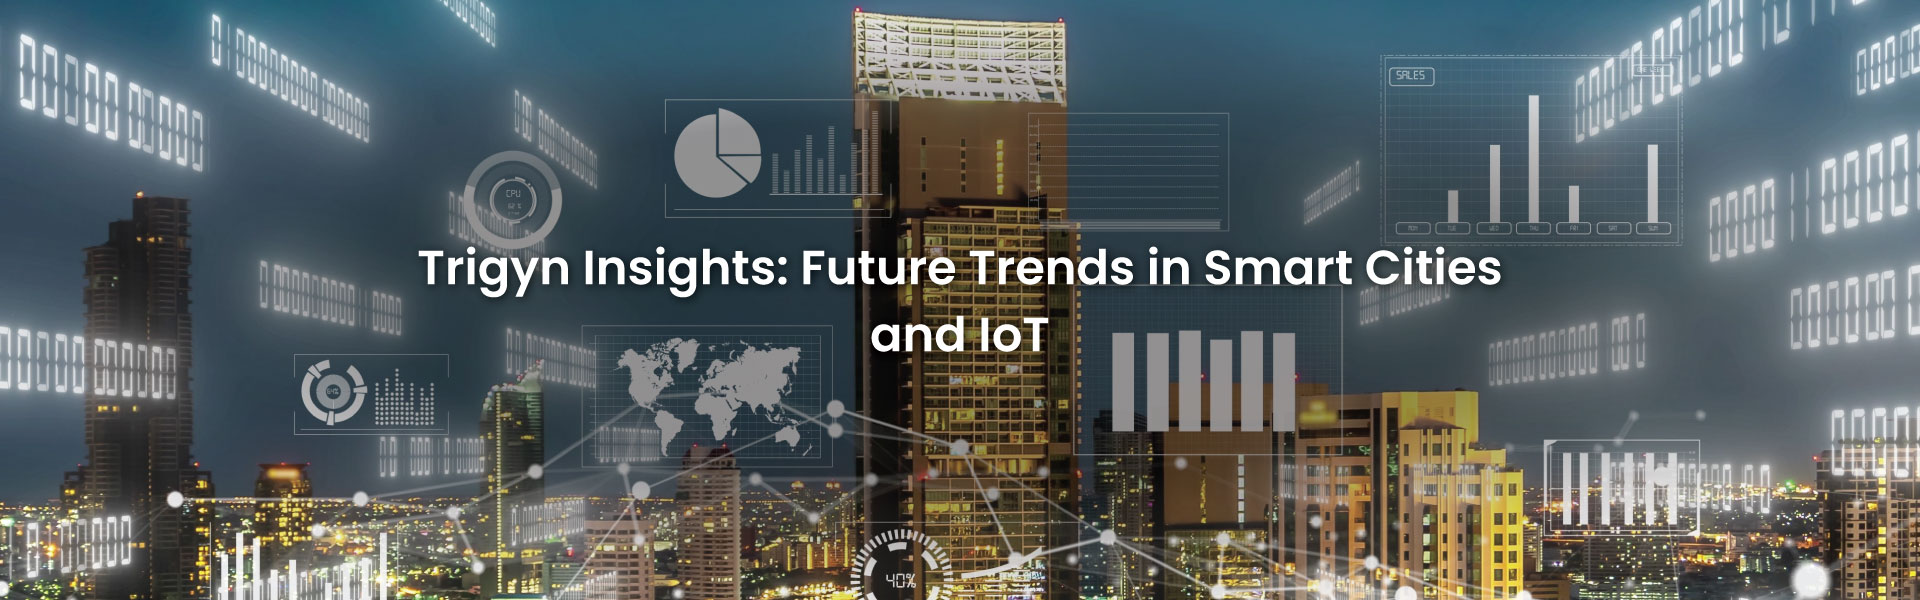 Trends in Smart Cities and IoT